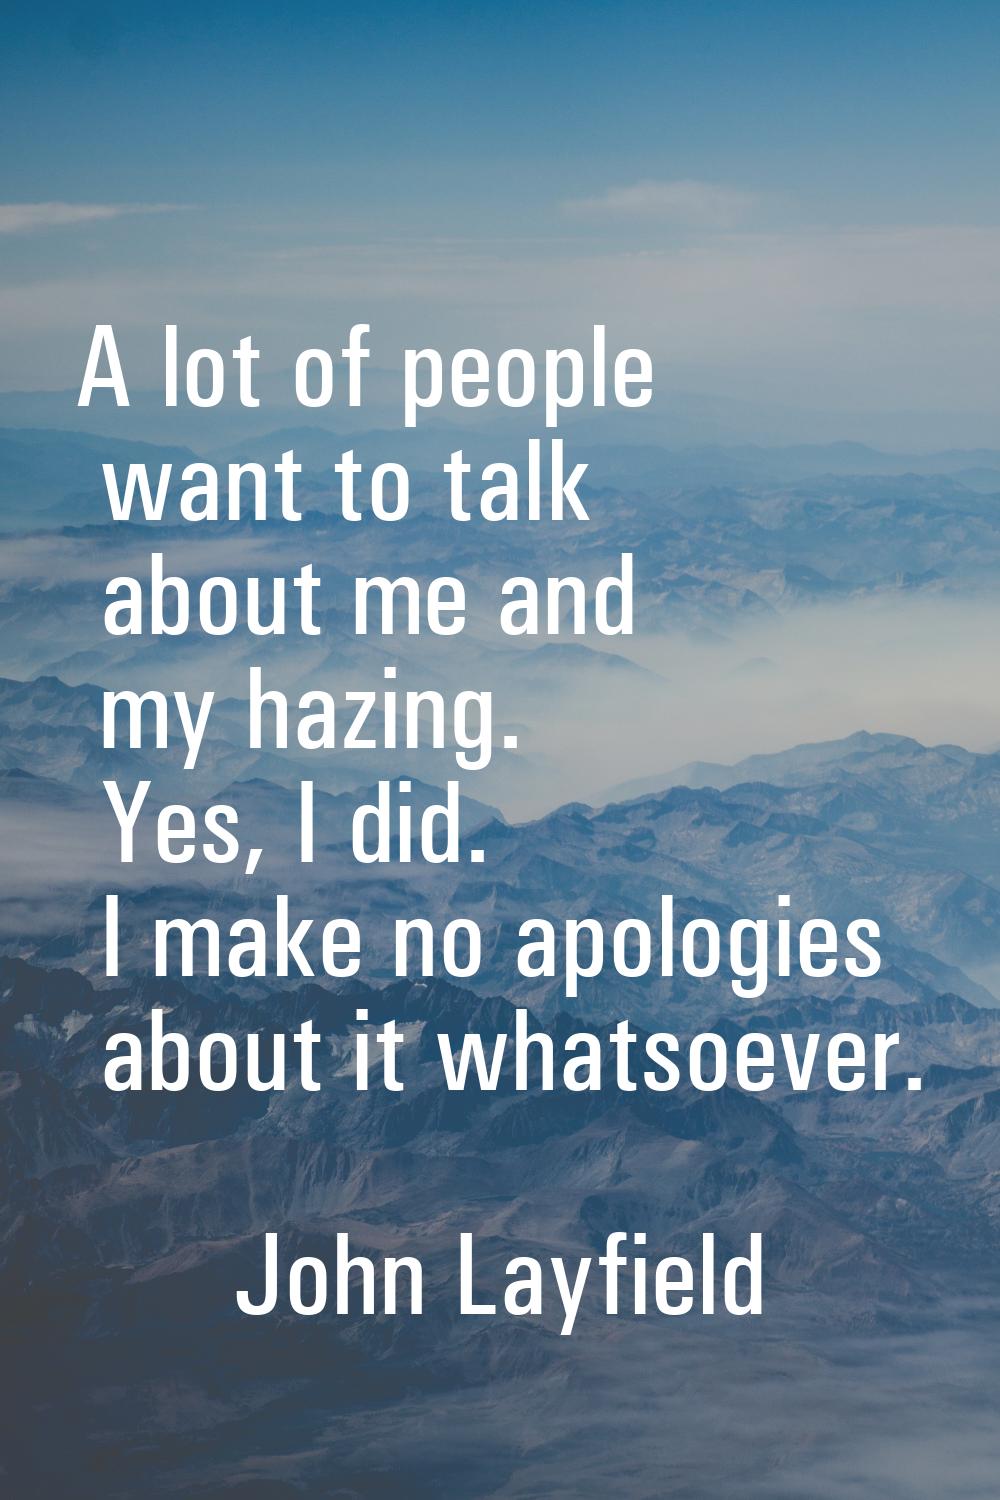 A lot of people want to talk about me and my hazing. Yes, I did. I make no apologies about it whats